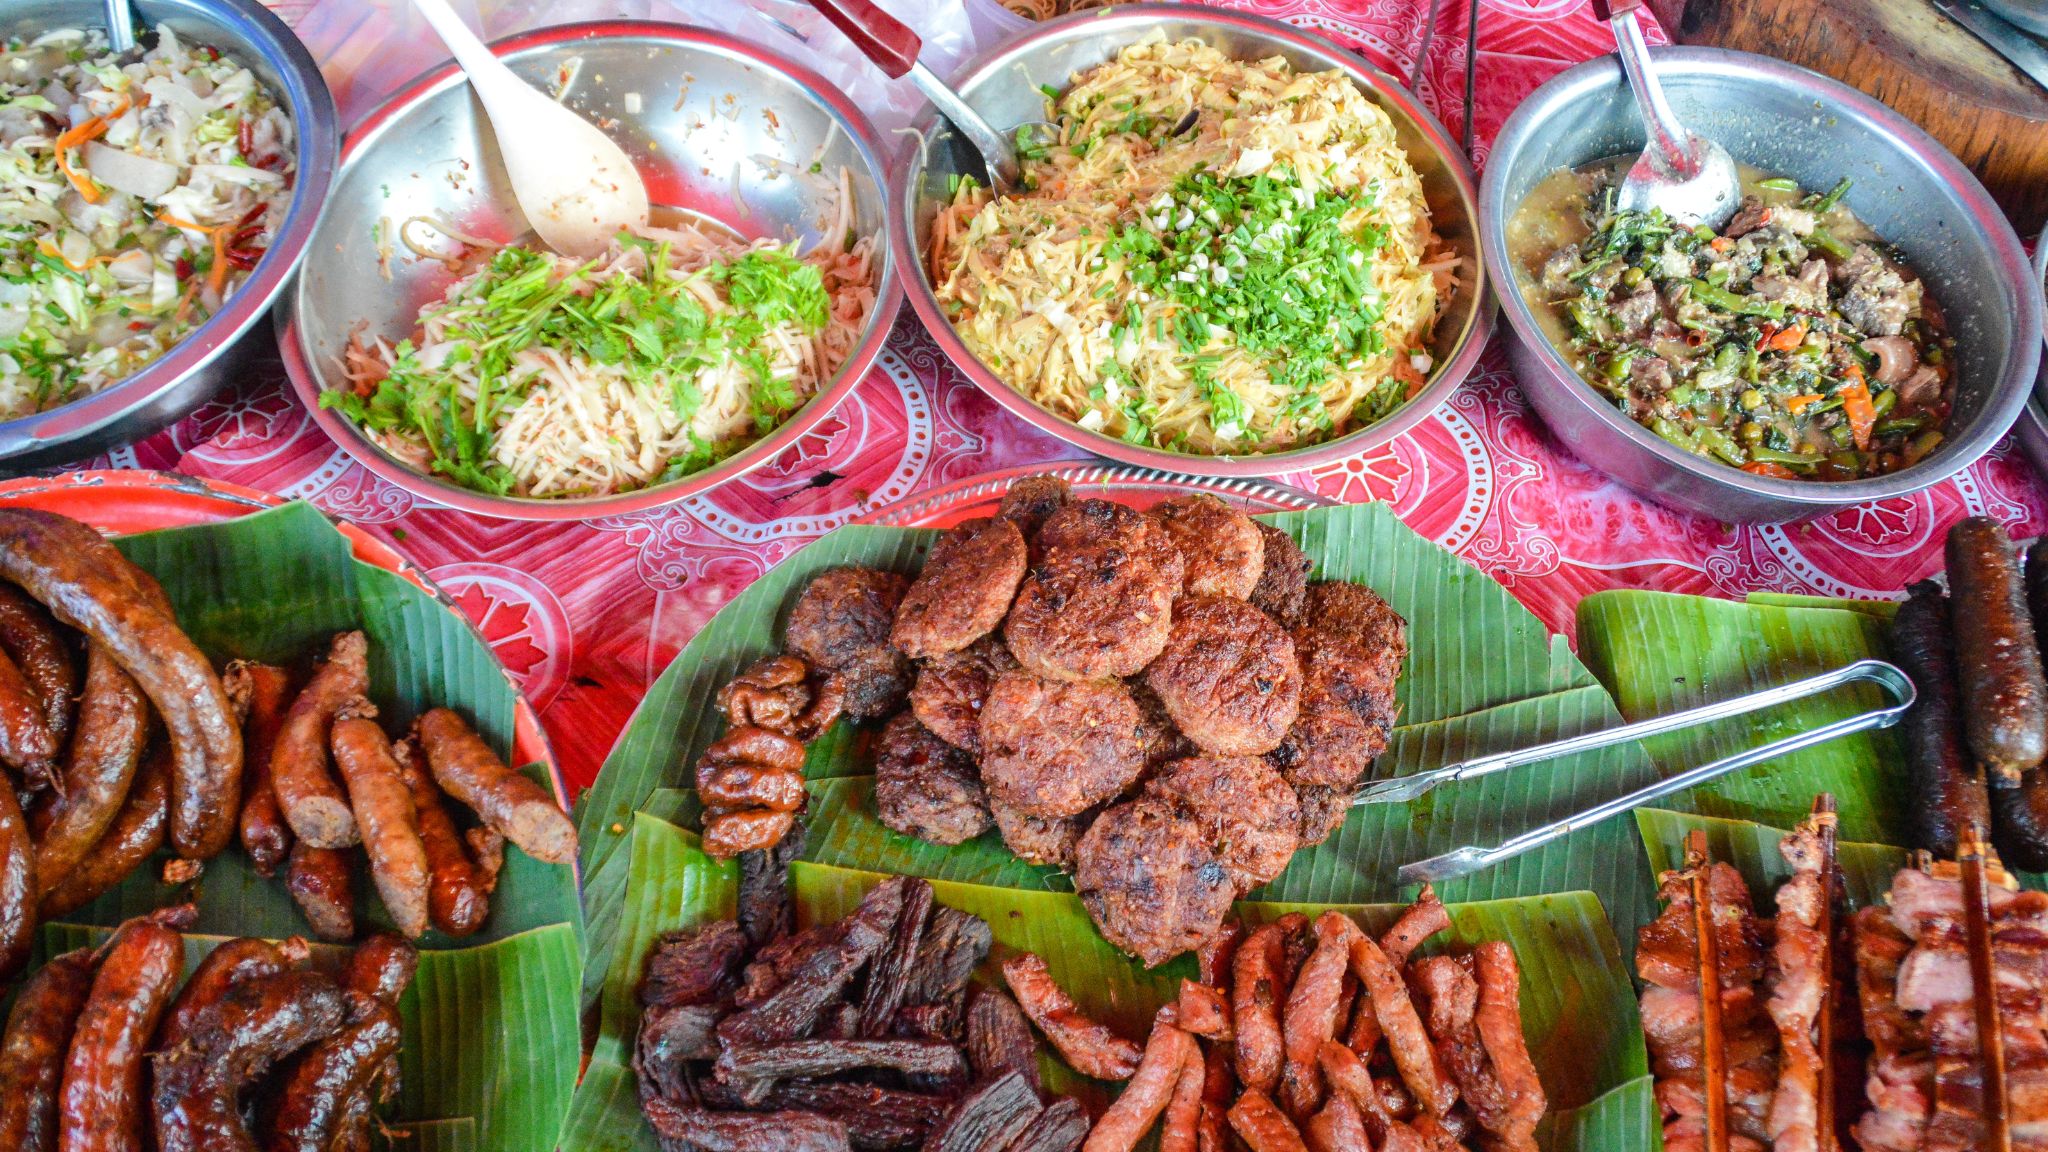 Day 3 Discover The Lao Cuisine